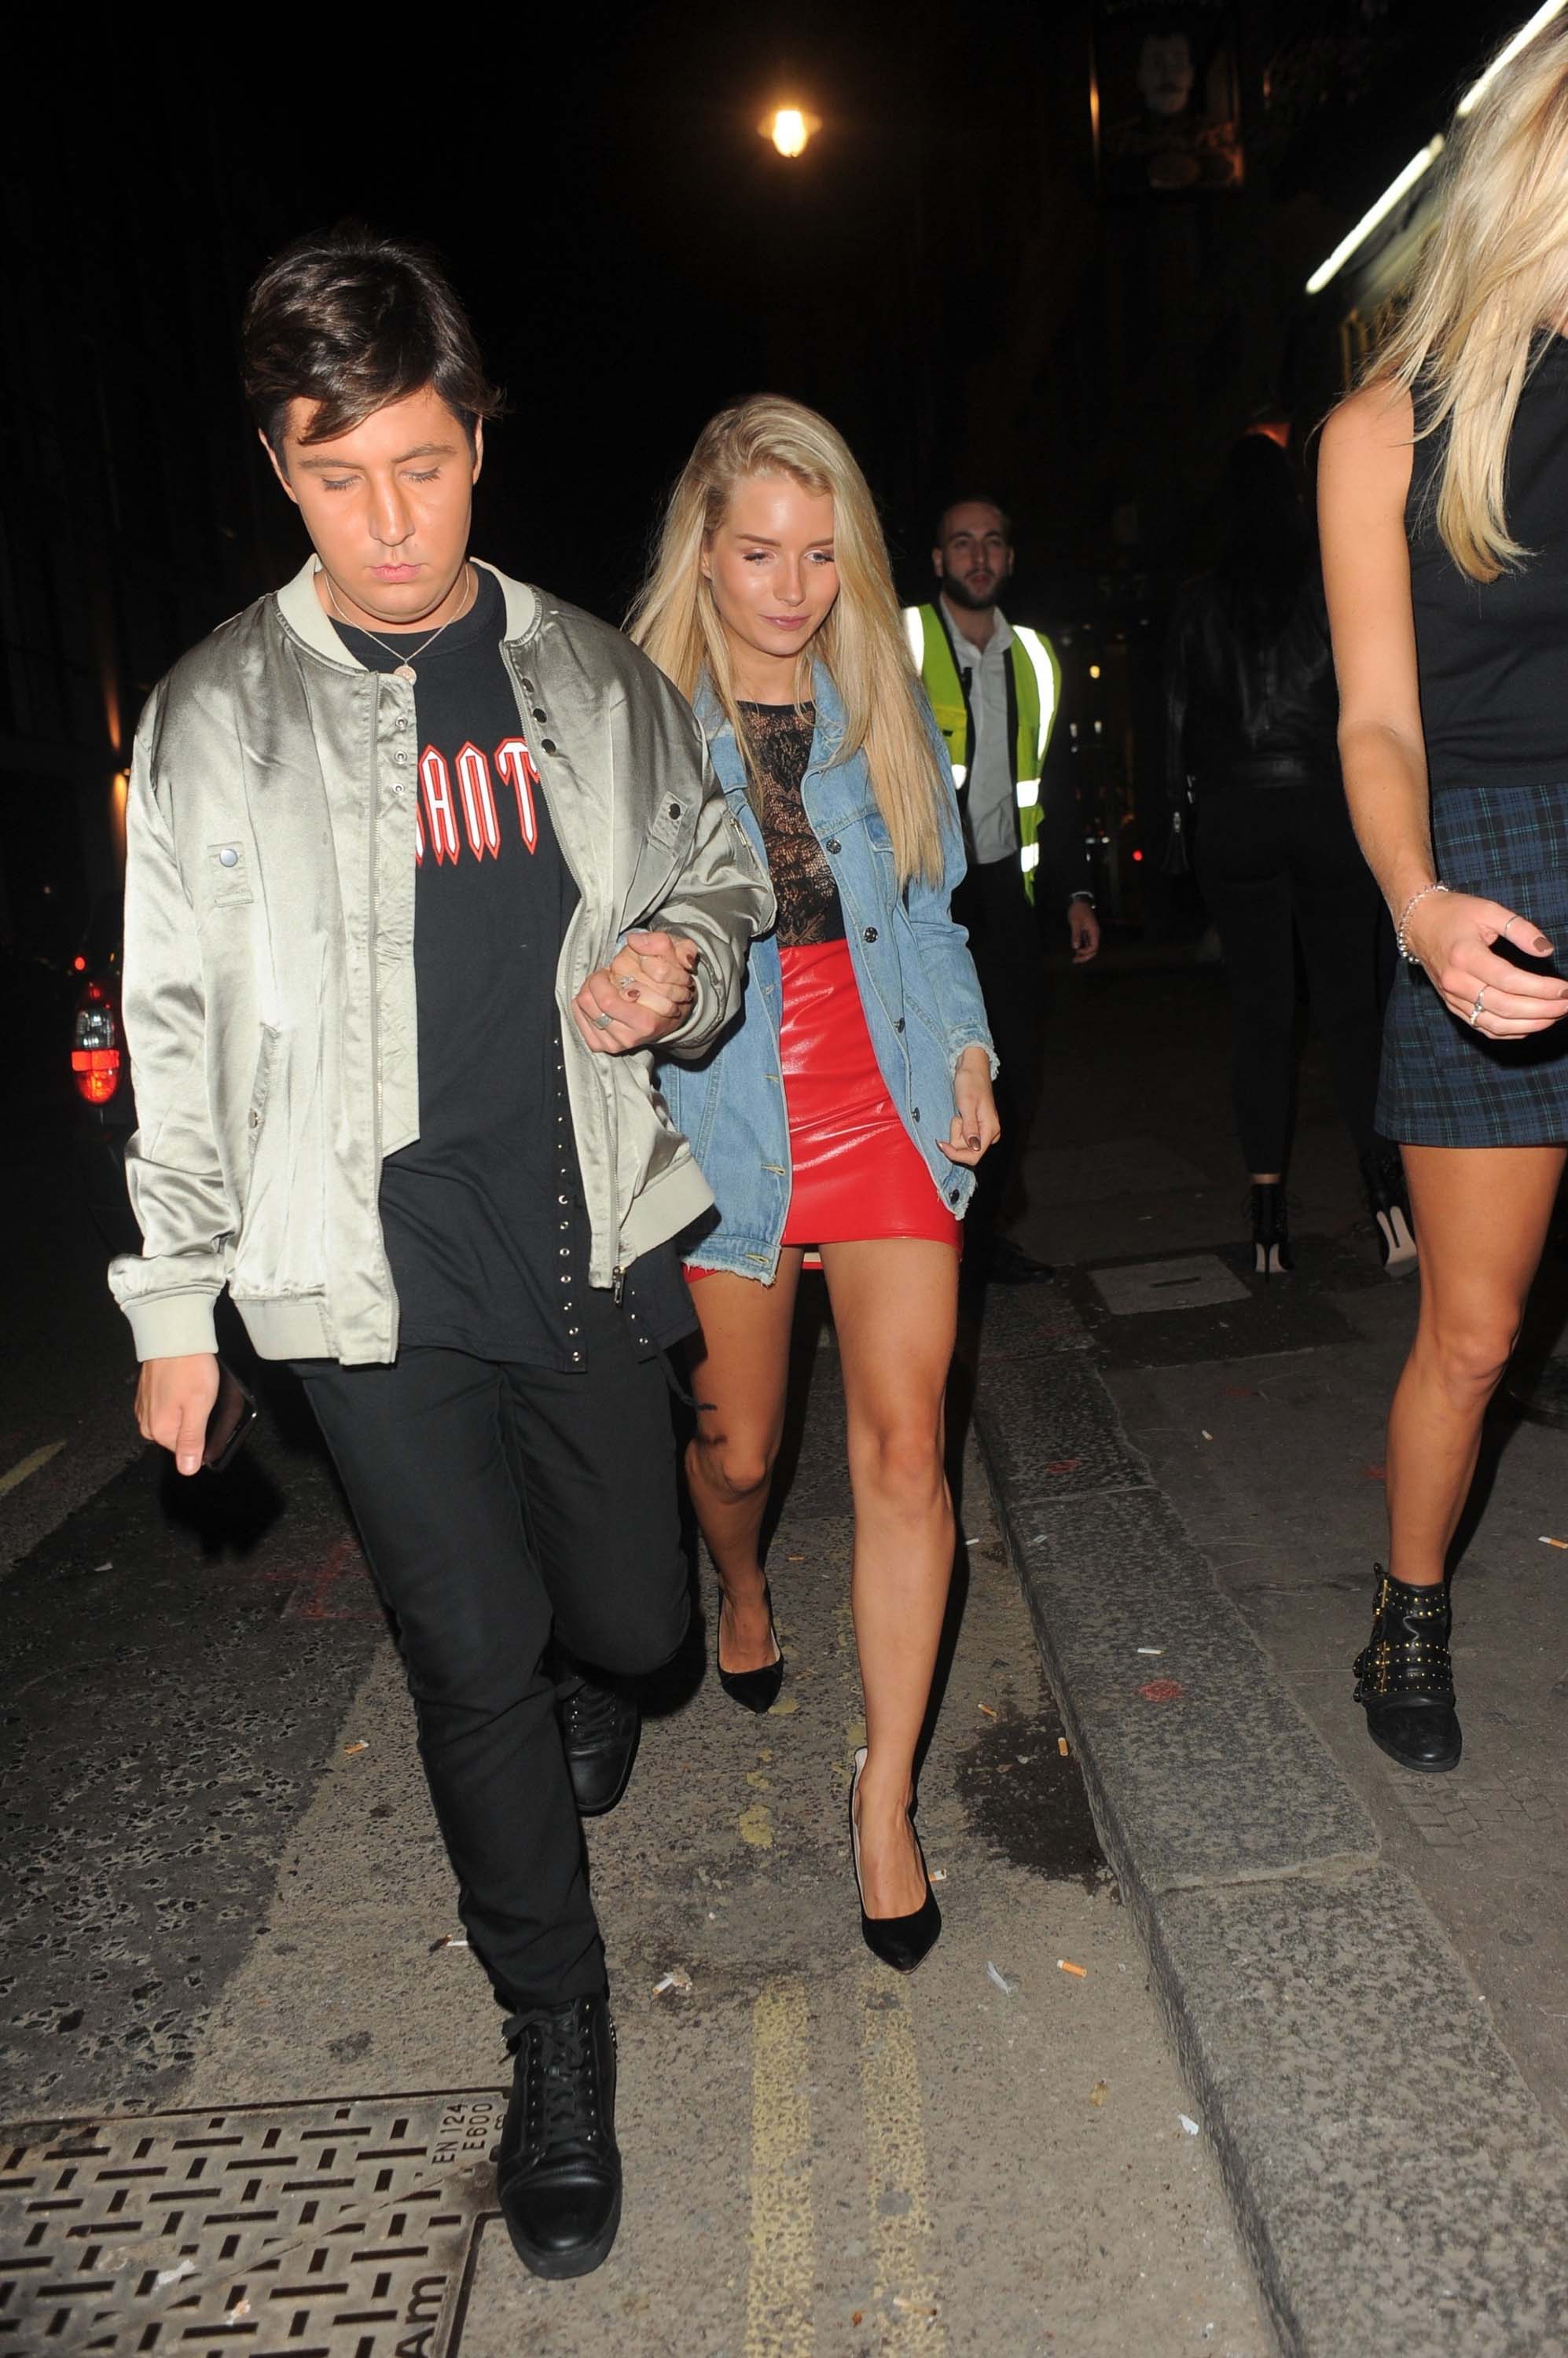 Lottie Moss spotted on a night out in London